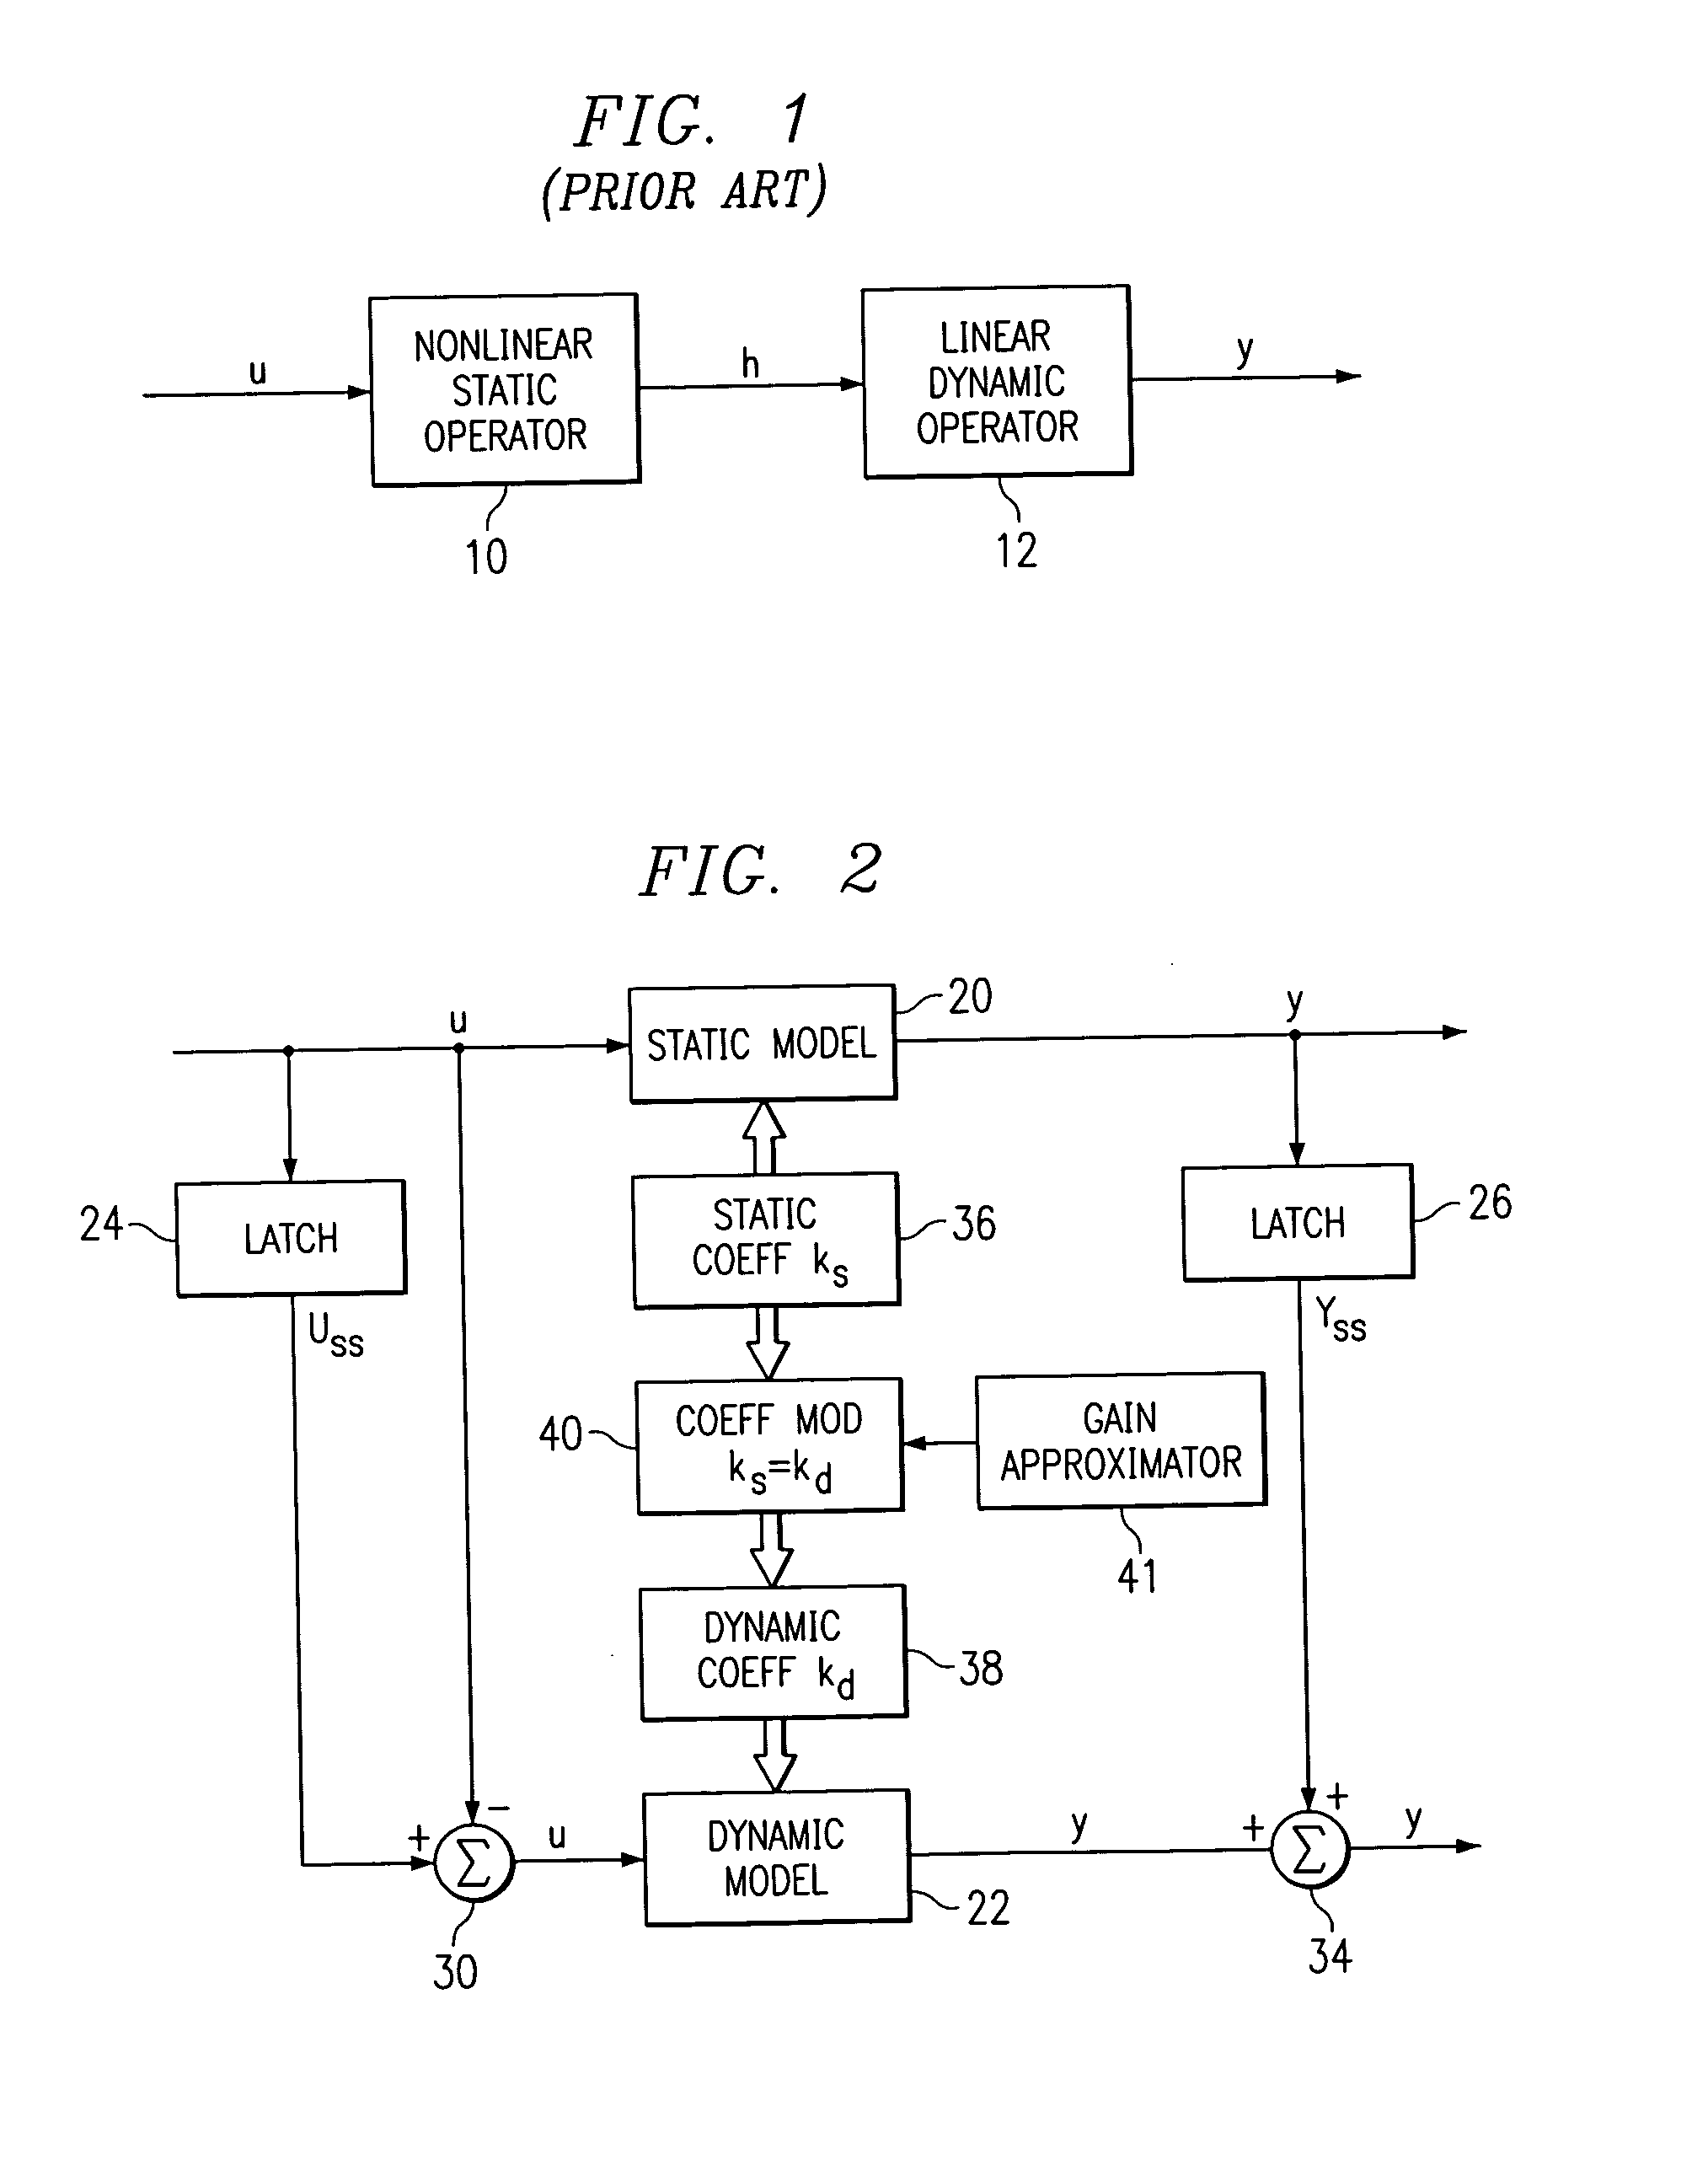 Method and apparatus for modeling dynamic and steady-state processes for prediction, control and optimization